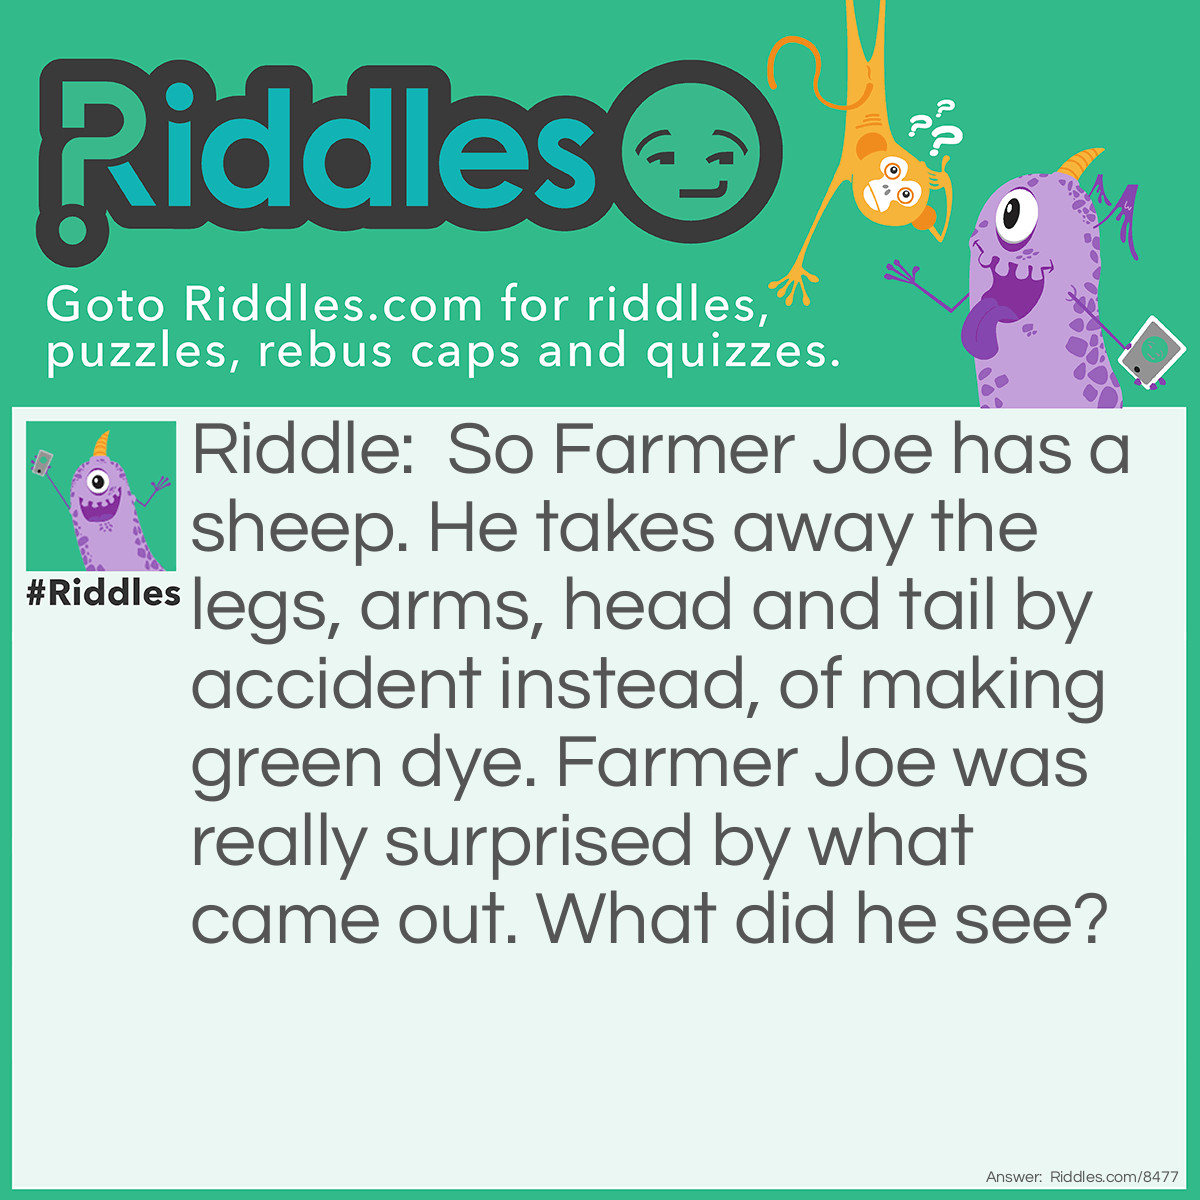 Riddle: So Farmer Joe has a sheep. He takes away the legs, arms, head and tail by accident instead, of making green dye. Farmer Joe was really surprised by what came out. What did he see? Answer: A sheep with no legs, arms, head and tail, if you think about it, it is a: CLOUD